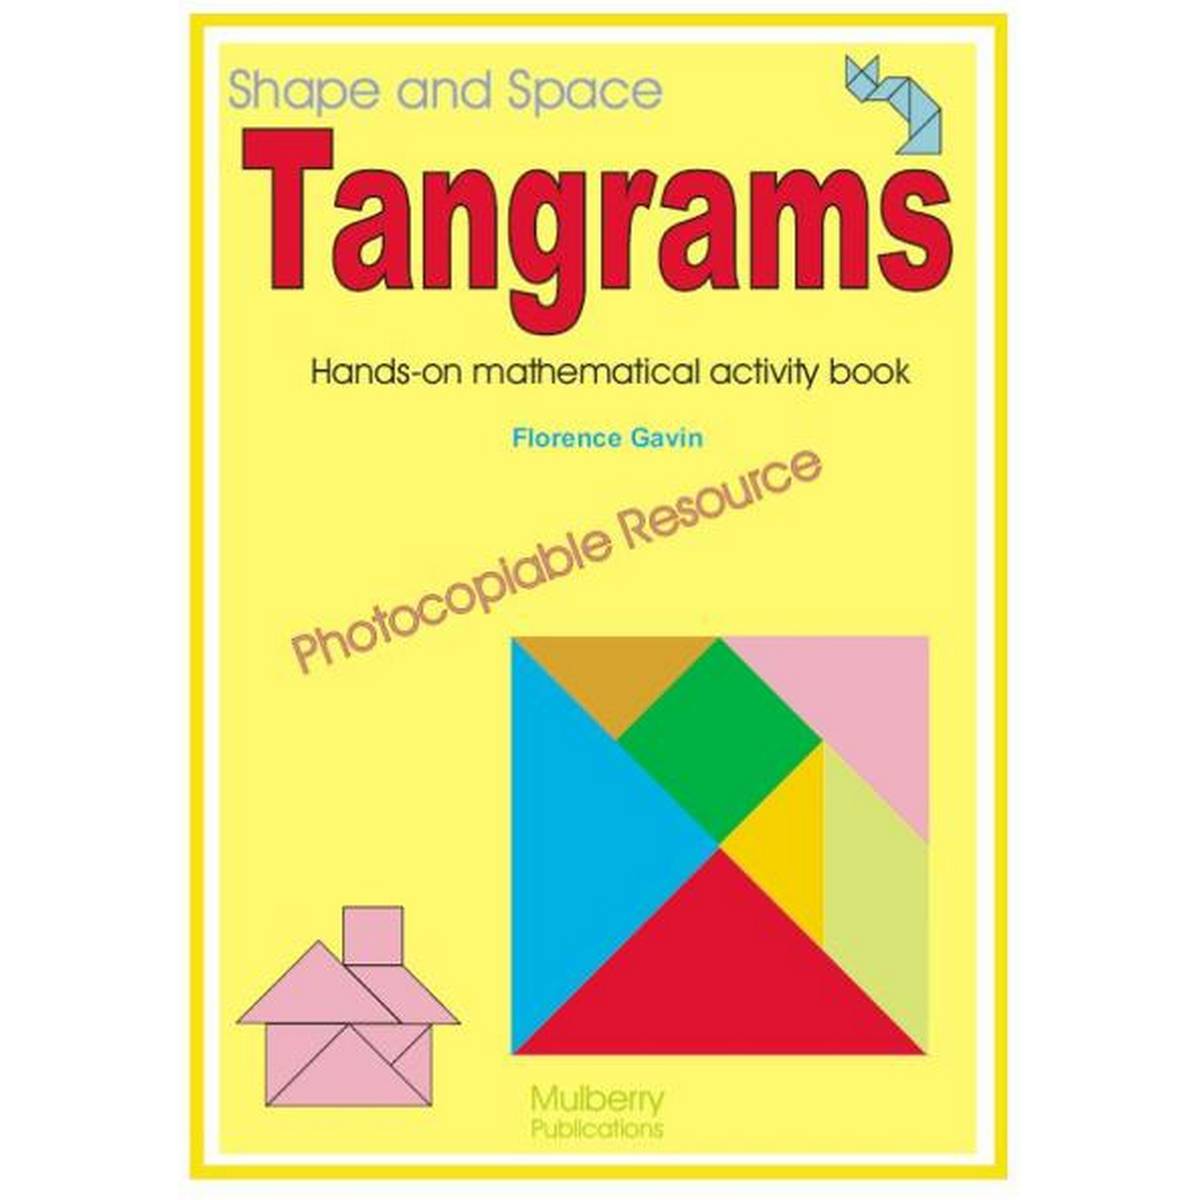 Tangrams: Hands-on Mathematical Photocopiable Activity Book